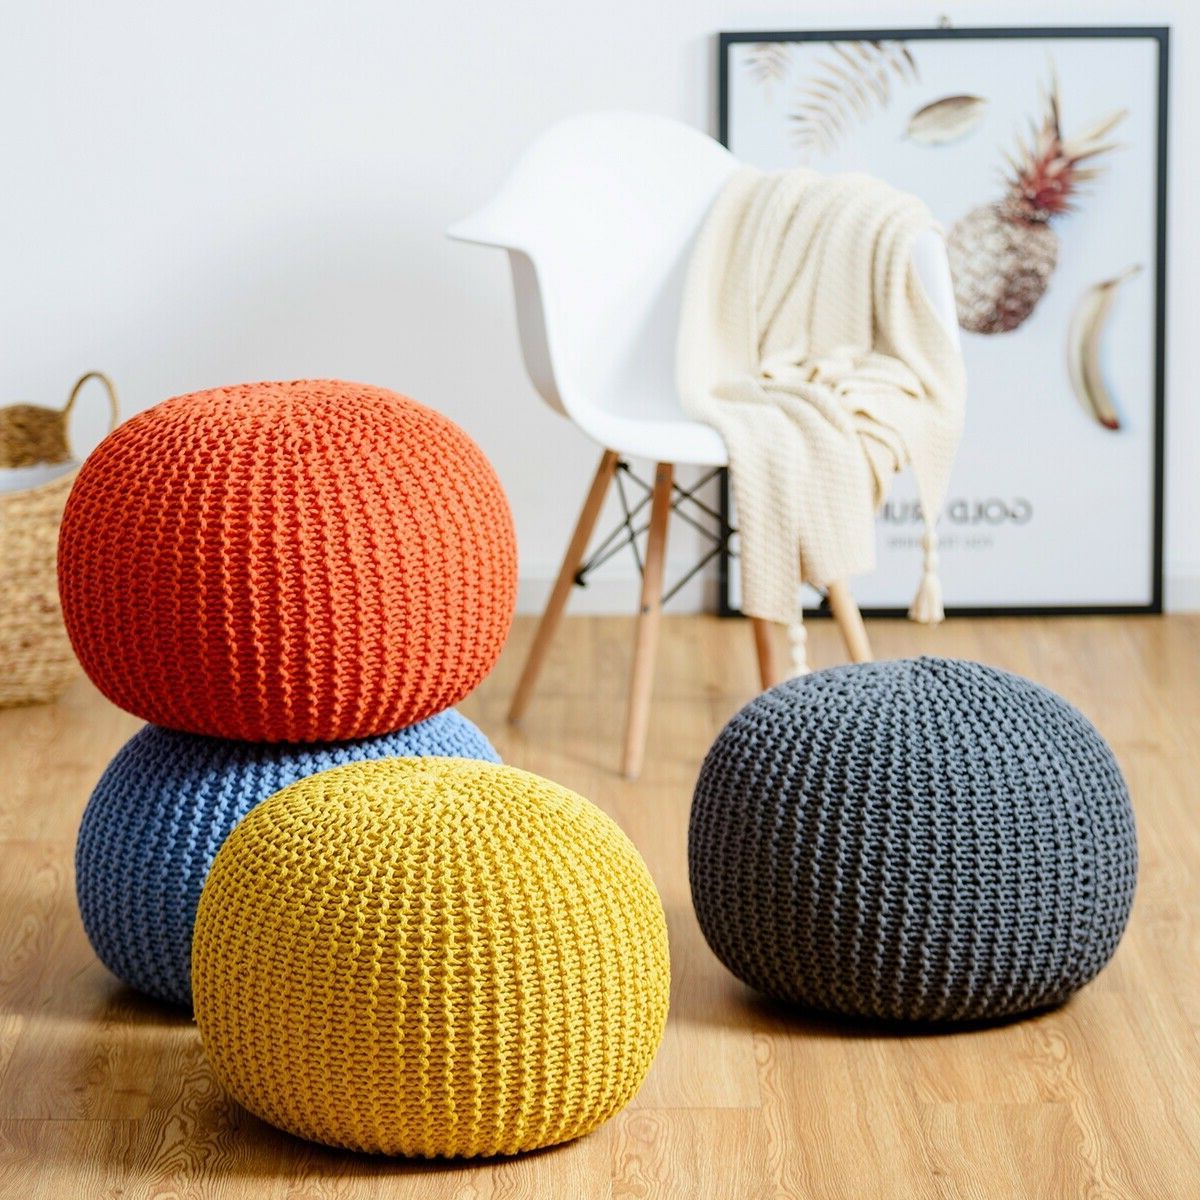 [%100% Cotton Hand Knitted Pouf Floor Seating Ottoman | Floor Seating Pertaining To Well Known Cream Cotton Knitted Pouf Ottomans|cream Cotton Knitted Pouf Ottomans Inside Most Recent 100% Cotton Hand Knitted Pouf Floor Seating Ottoman | Floor Seating|most Popular Cream Cotton Knitted Pouf Ottomans In 100% Cotton Hand Knitted Pouf Floor Seating Ottoman | Floor Seating|well Known 100% Cotton Hand Knitted Pouf Floor Seating Ottoman | Floor Seating For Cream Cotton Knitted Pouf Ottomans%] (View 3 of 10)